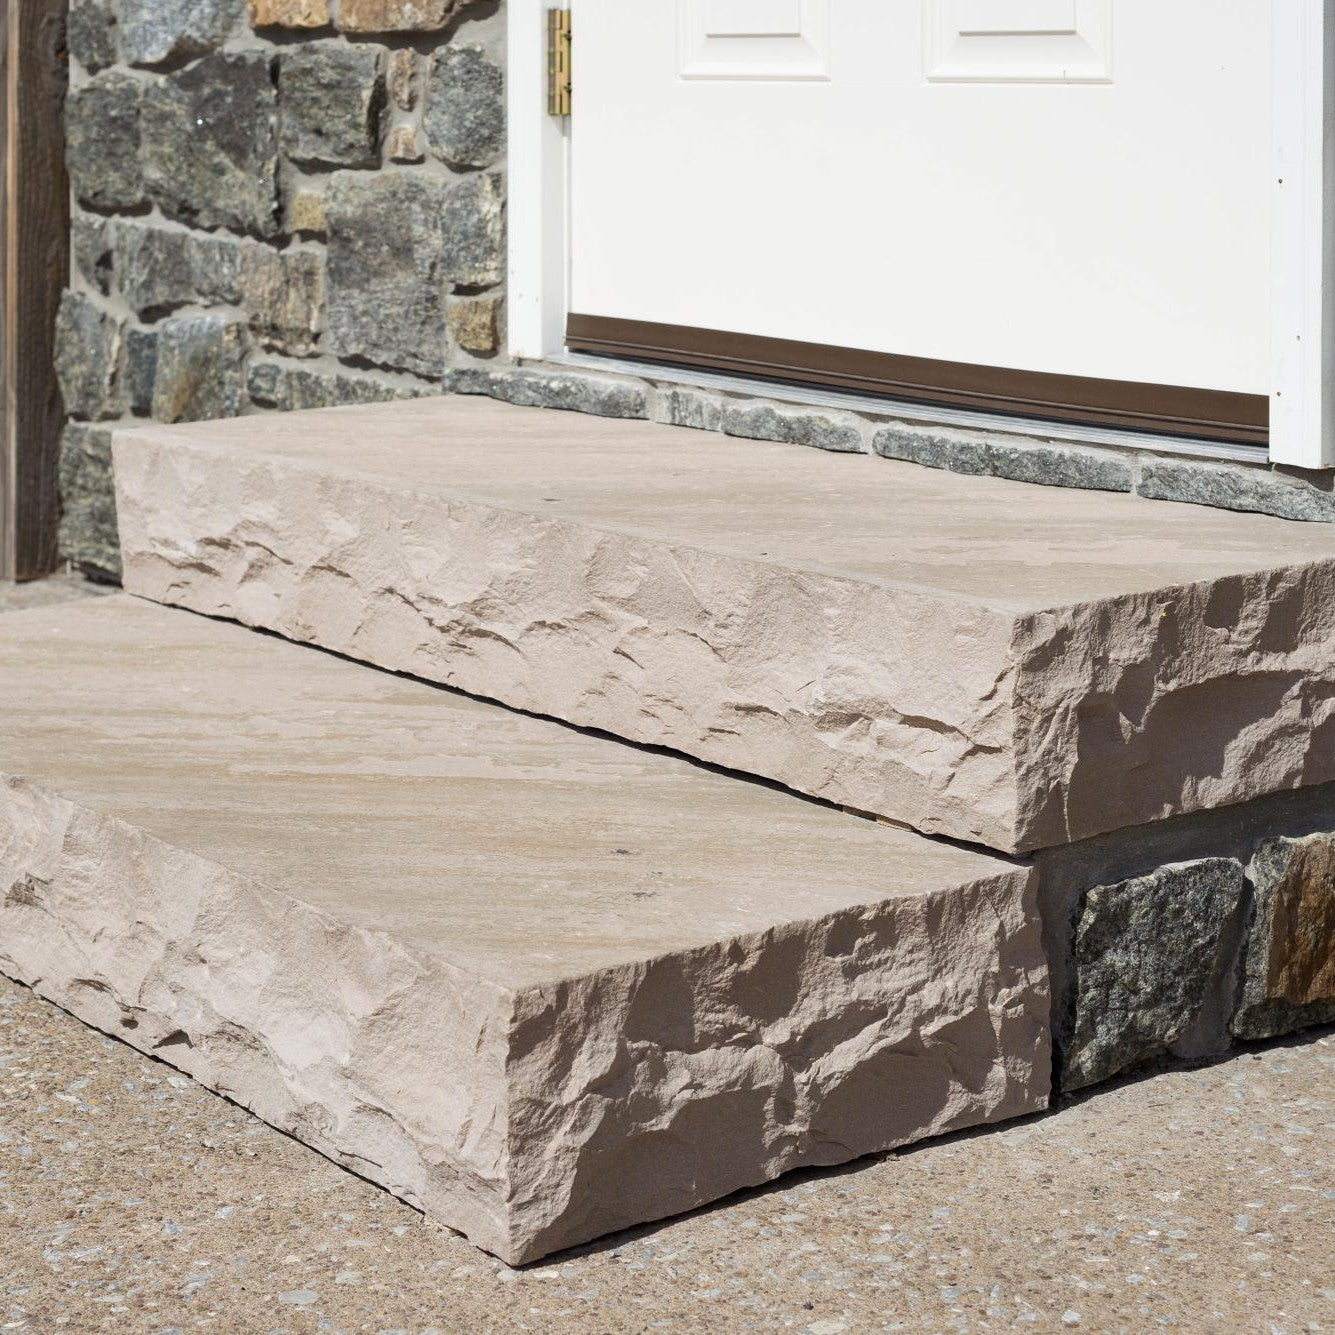 Assorted pieces from the Classic Series Flagstone Collection, showcasing the rustic charm of natural cleft tops and hand-cut rockfaced edges for authentic landscaping designs.